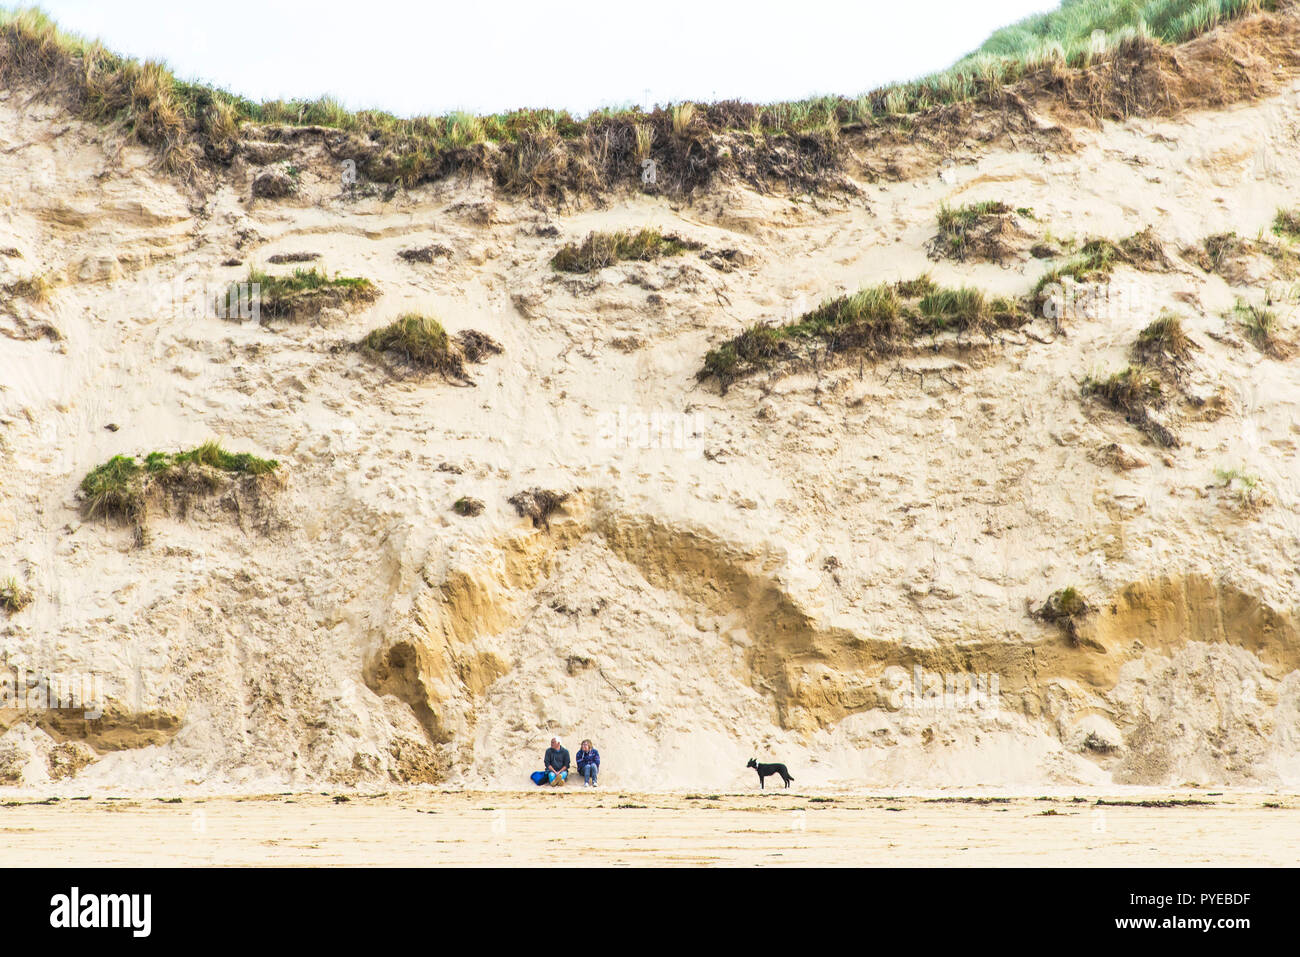 Crantock Beach in Newquay in Cornwall - People and their dog sitting at the foot of the dune system. Stock Photo